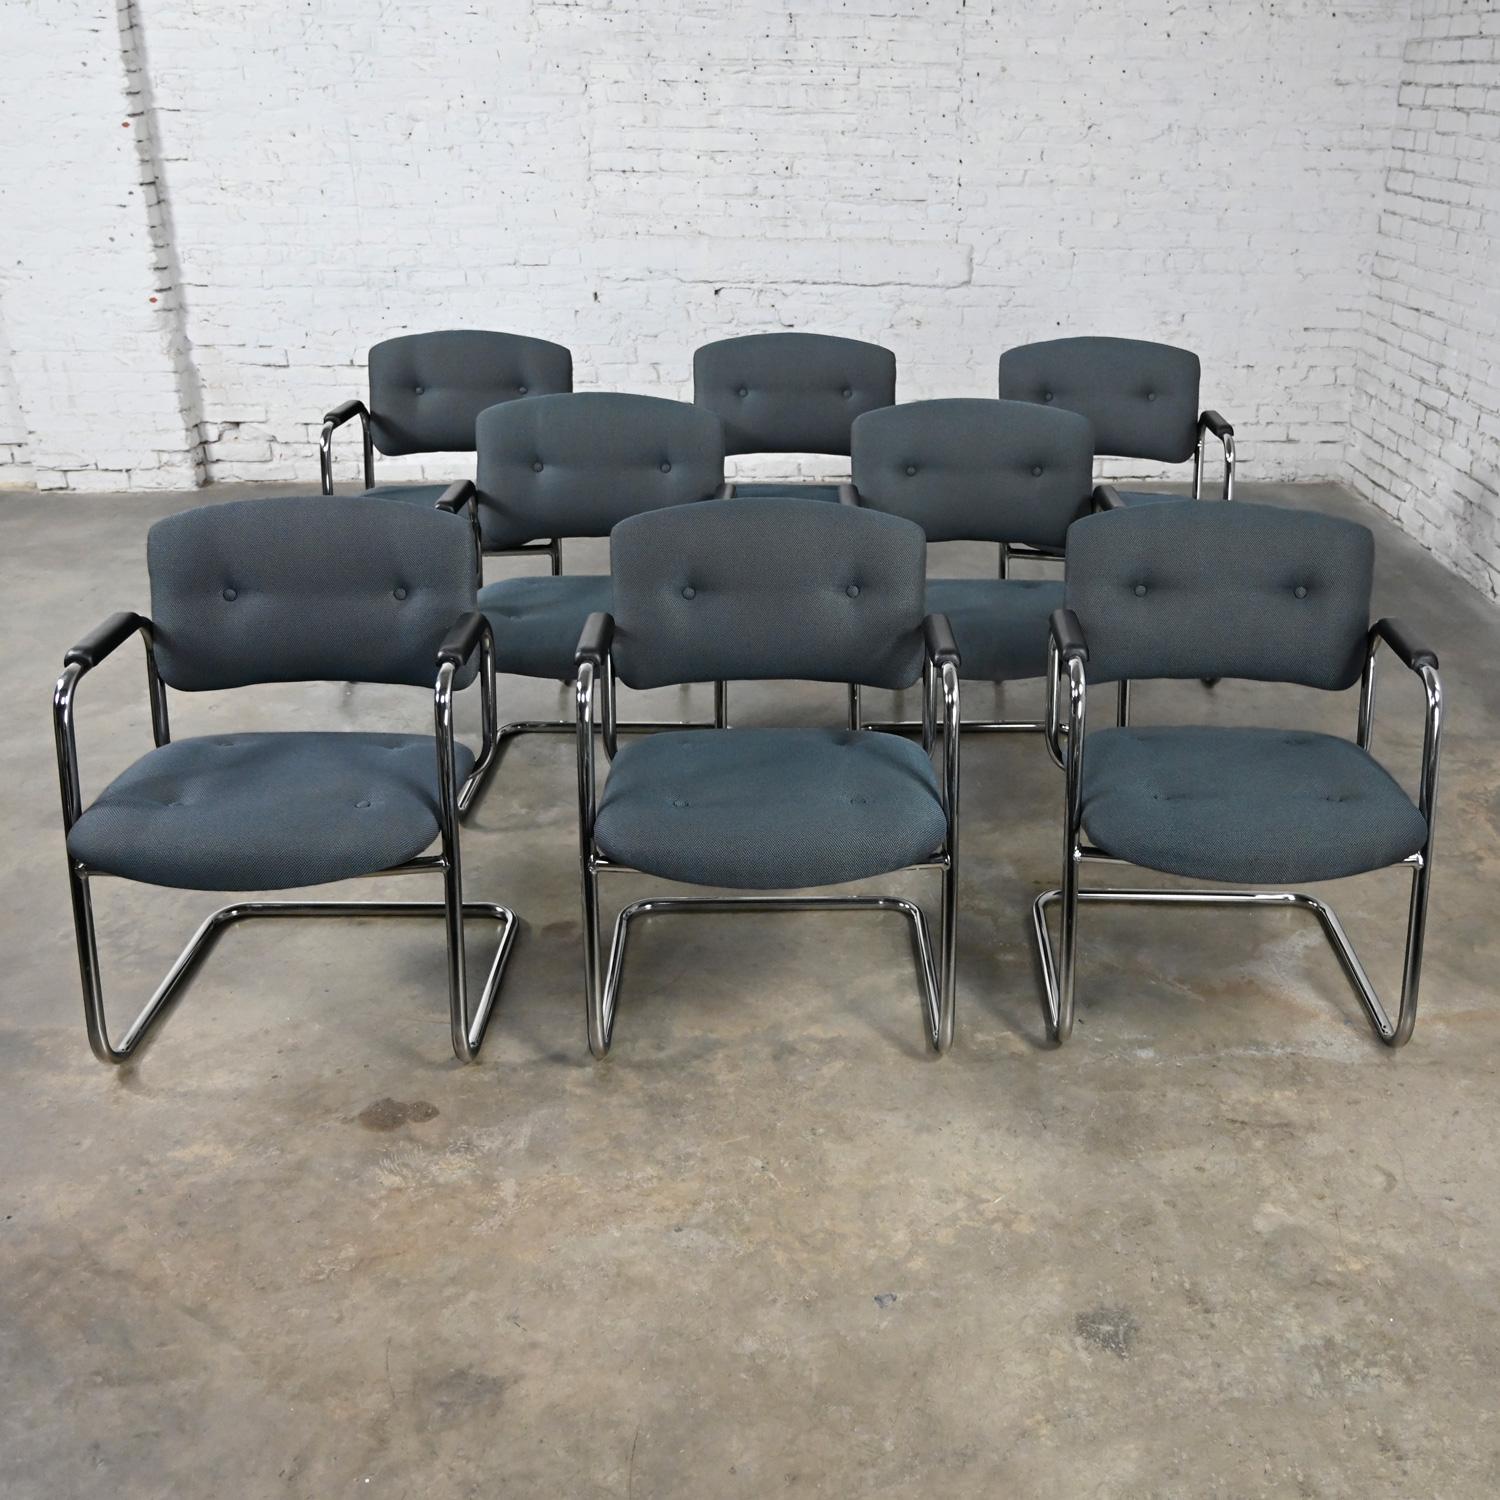 Late 20th Century Gray & Chrome Cantilever Chairs Style Steelcase Set of 8 For Sale 9